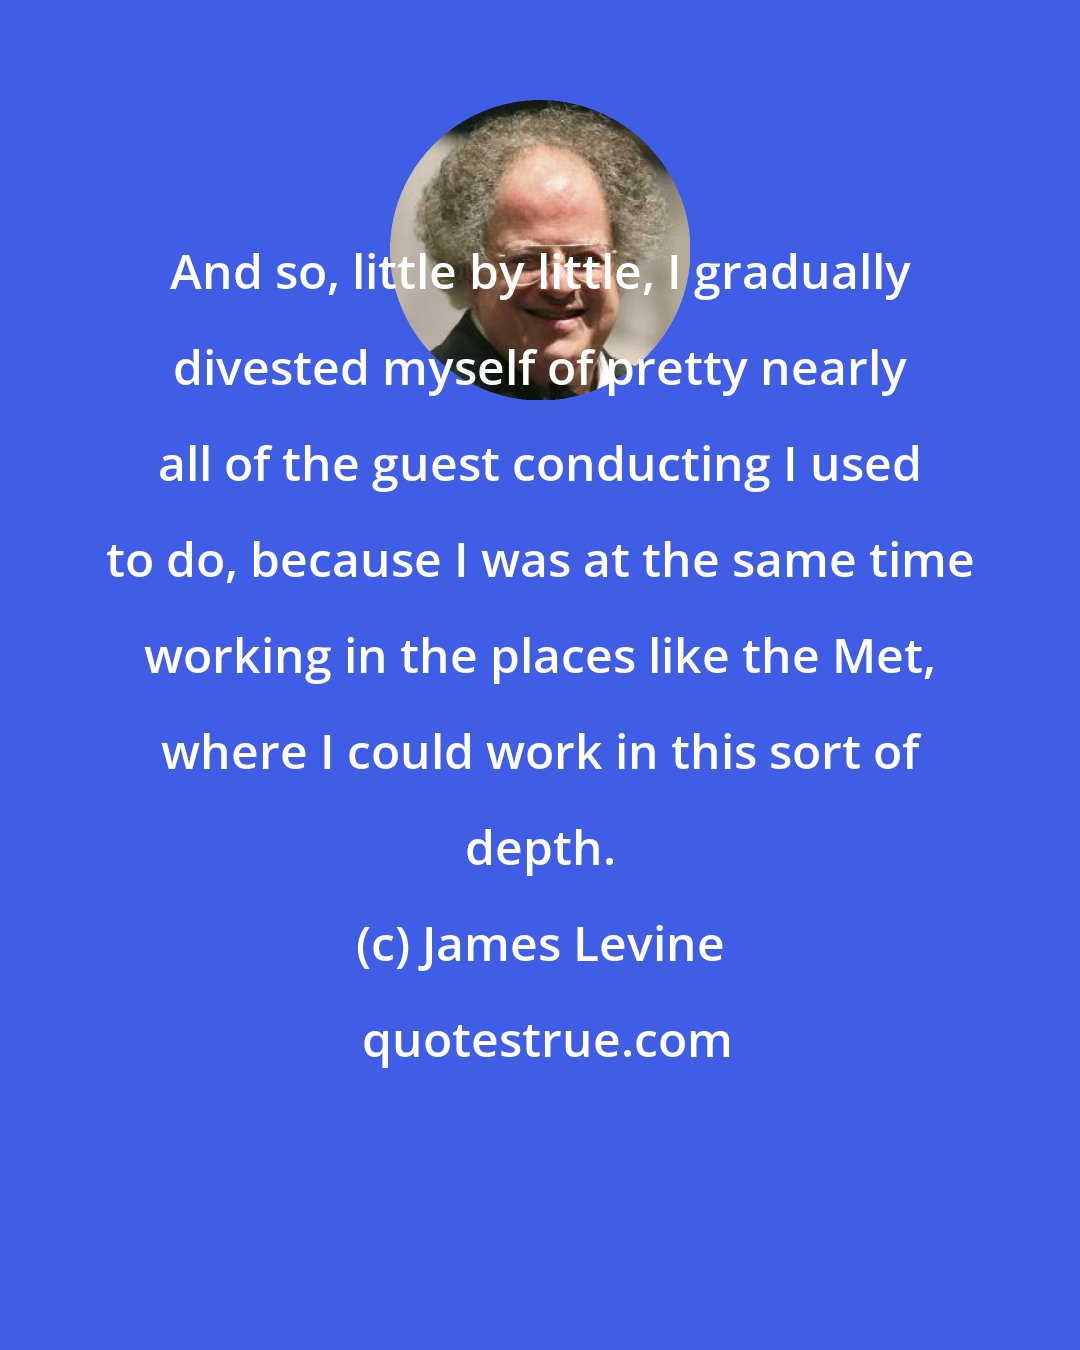 James Levine: And so, little by little, I gradually divested myself of pretty nearly all of the guest conducting I used to do, because I was at the same time working in the places like the Met, where I could work in this sort of depth.